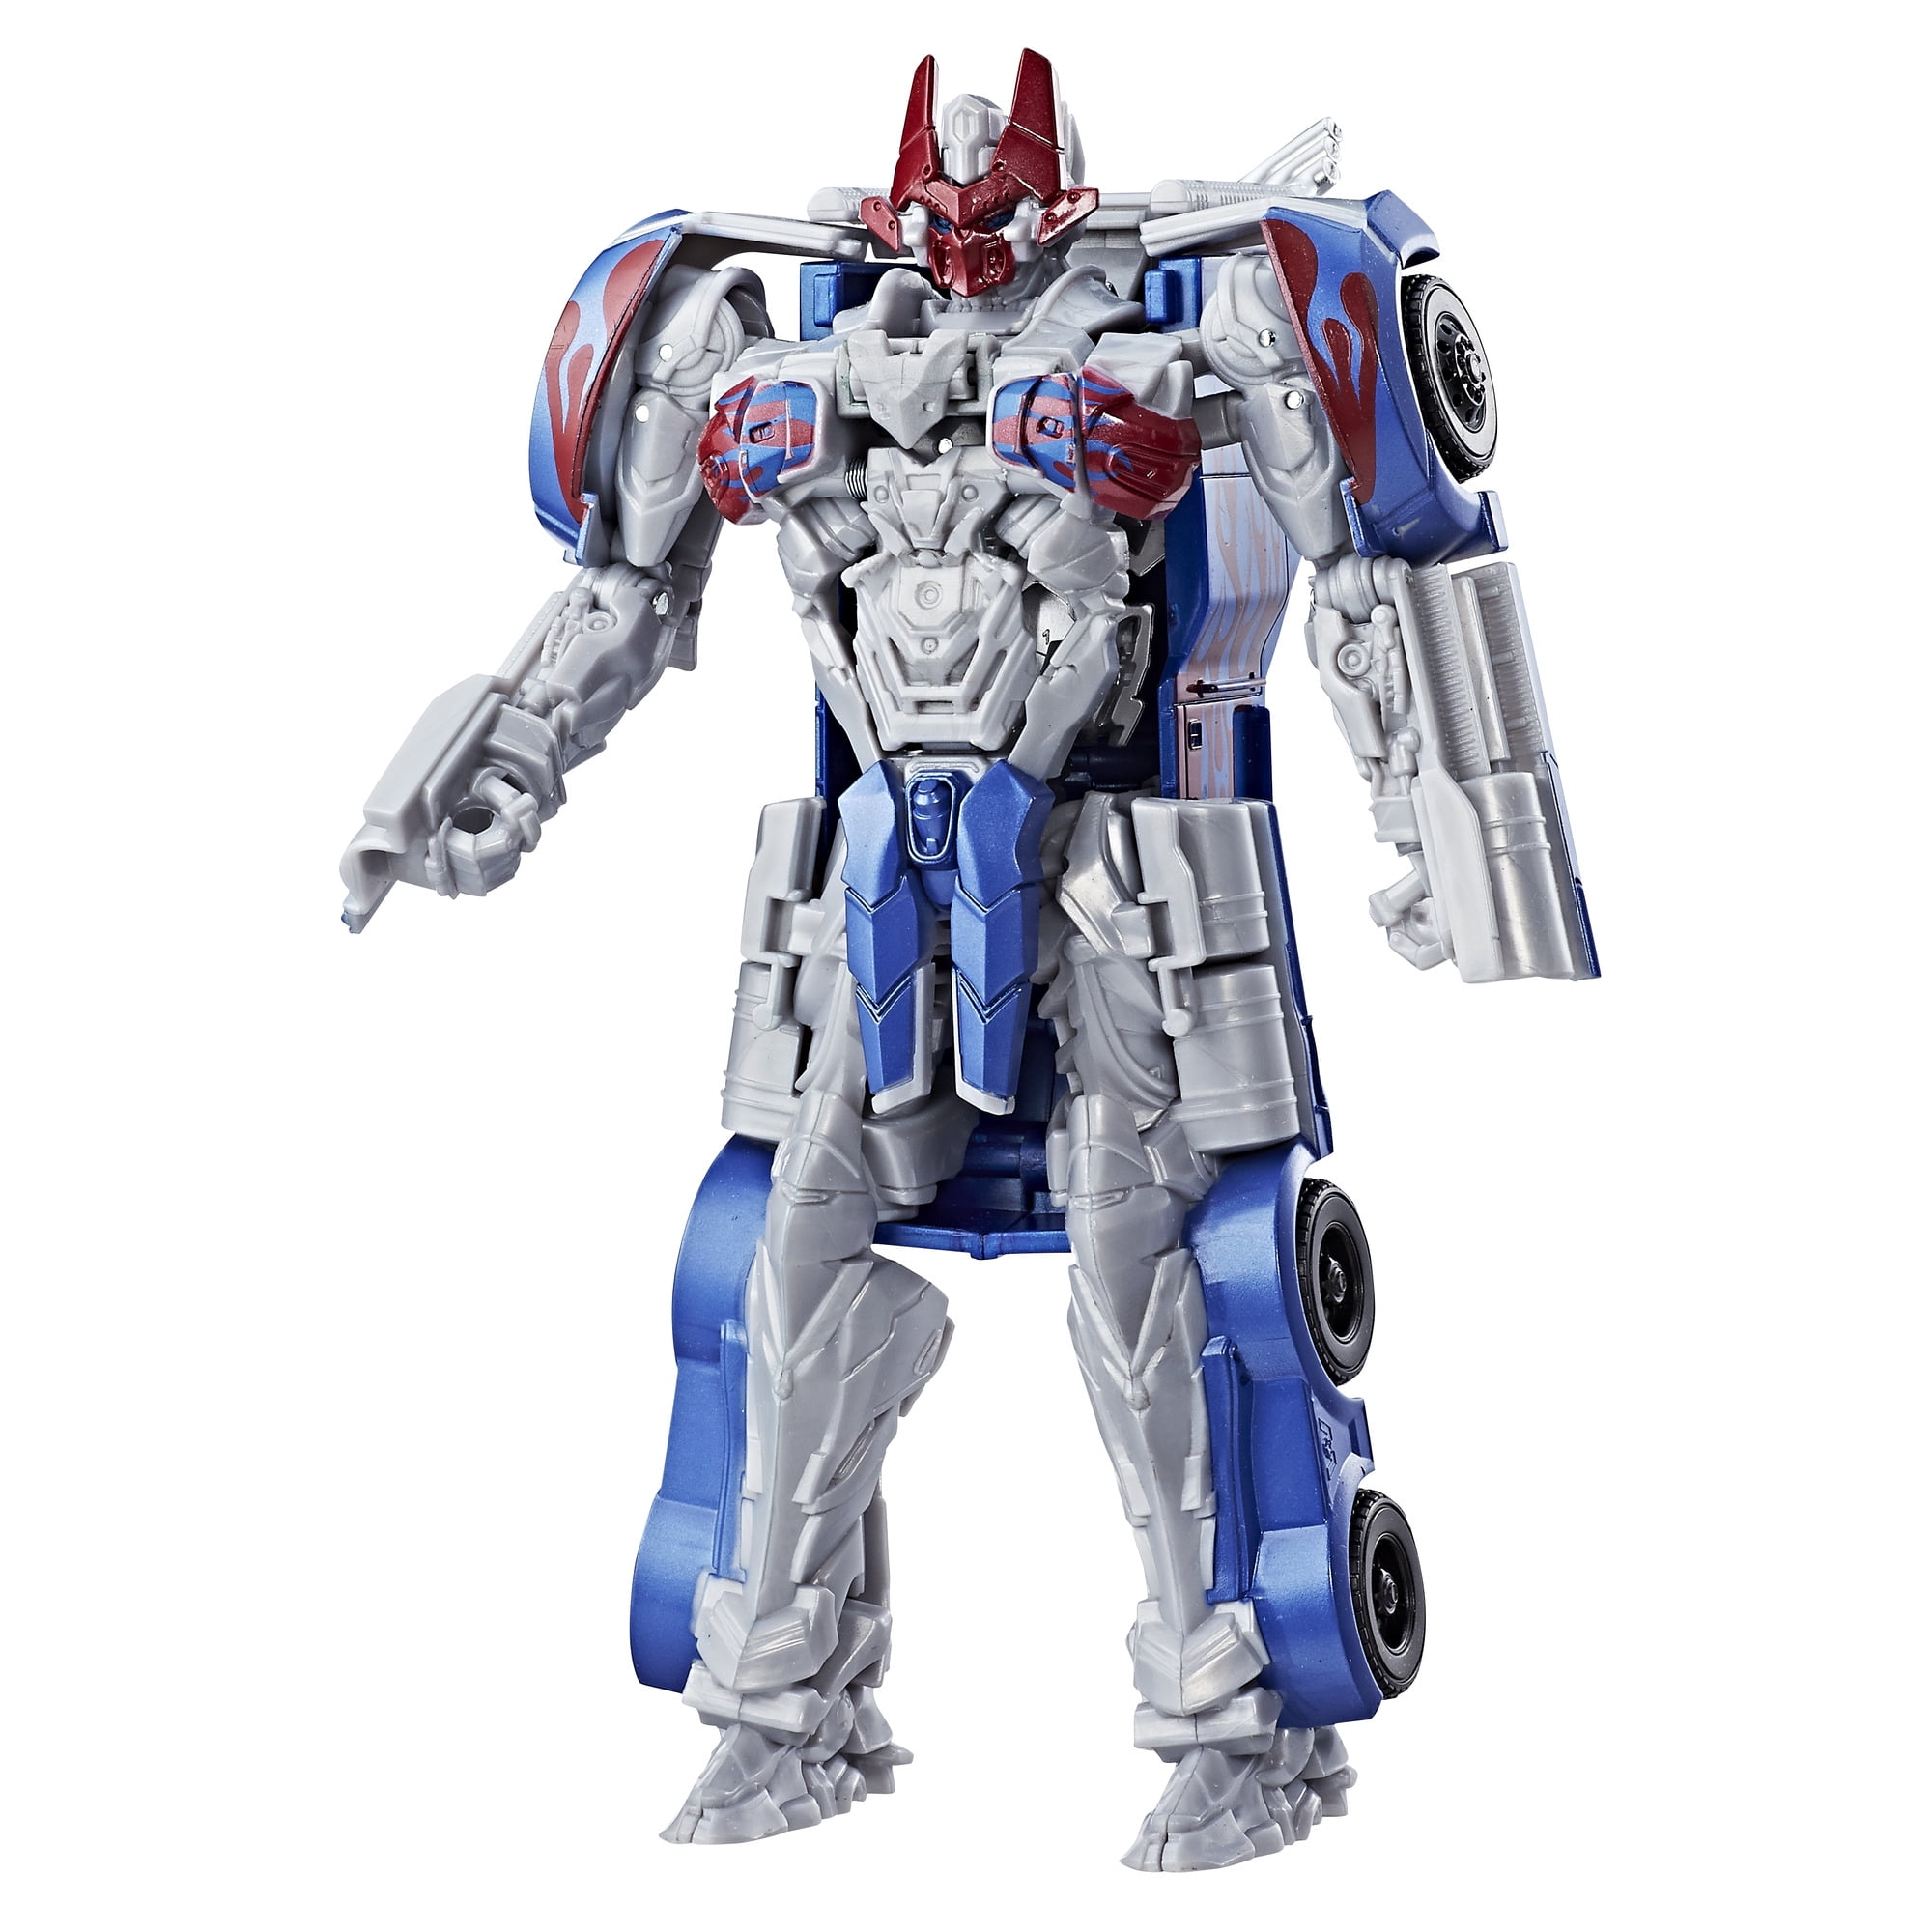 LARGE TRANSFORMERS 5 THE LAST KNIGHT OPTIMUS PRIME ACTION FIGURE TOYS XMAS GIFTS 